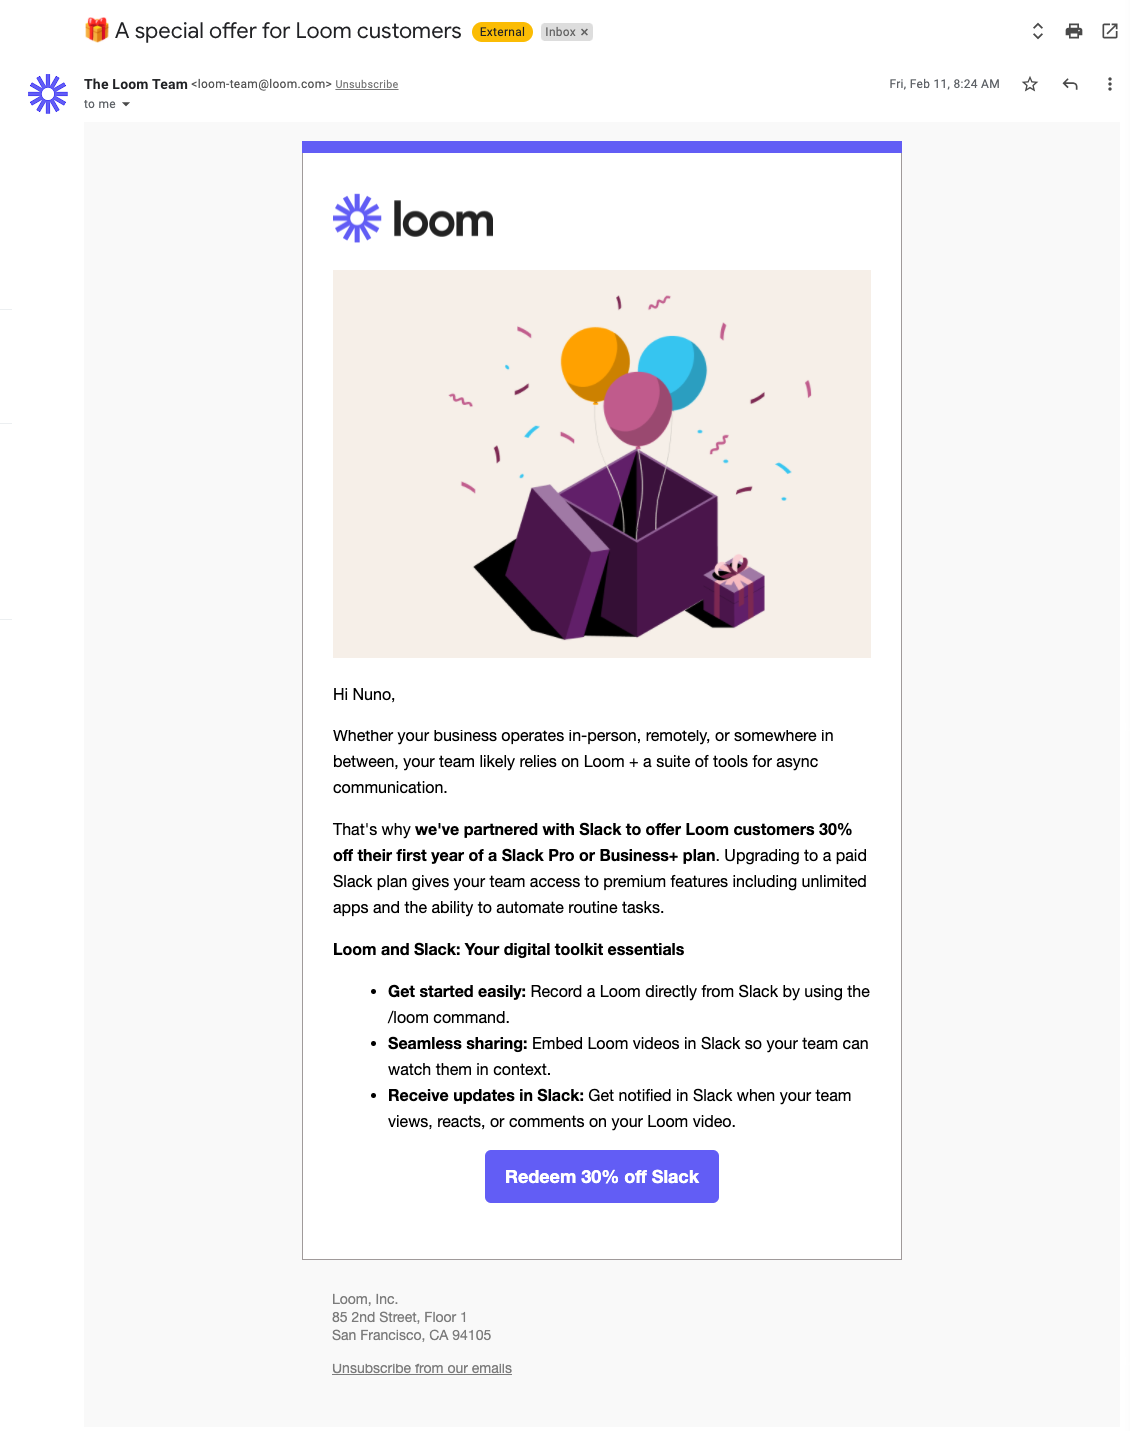 Loom - Email Special Offer